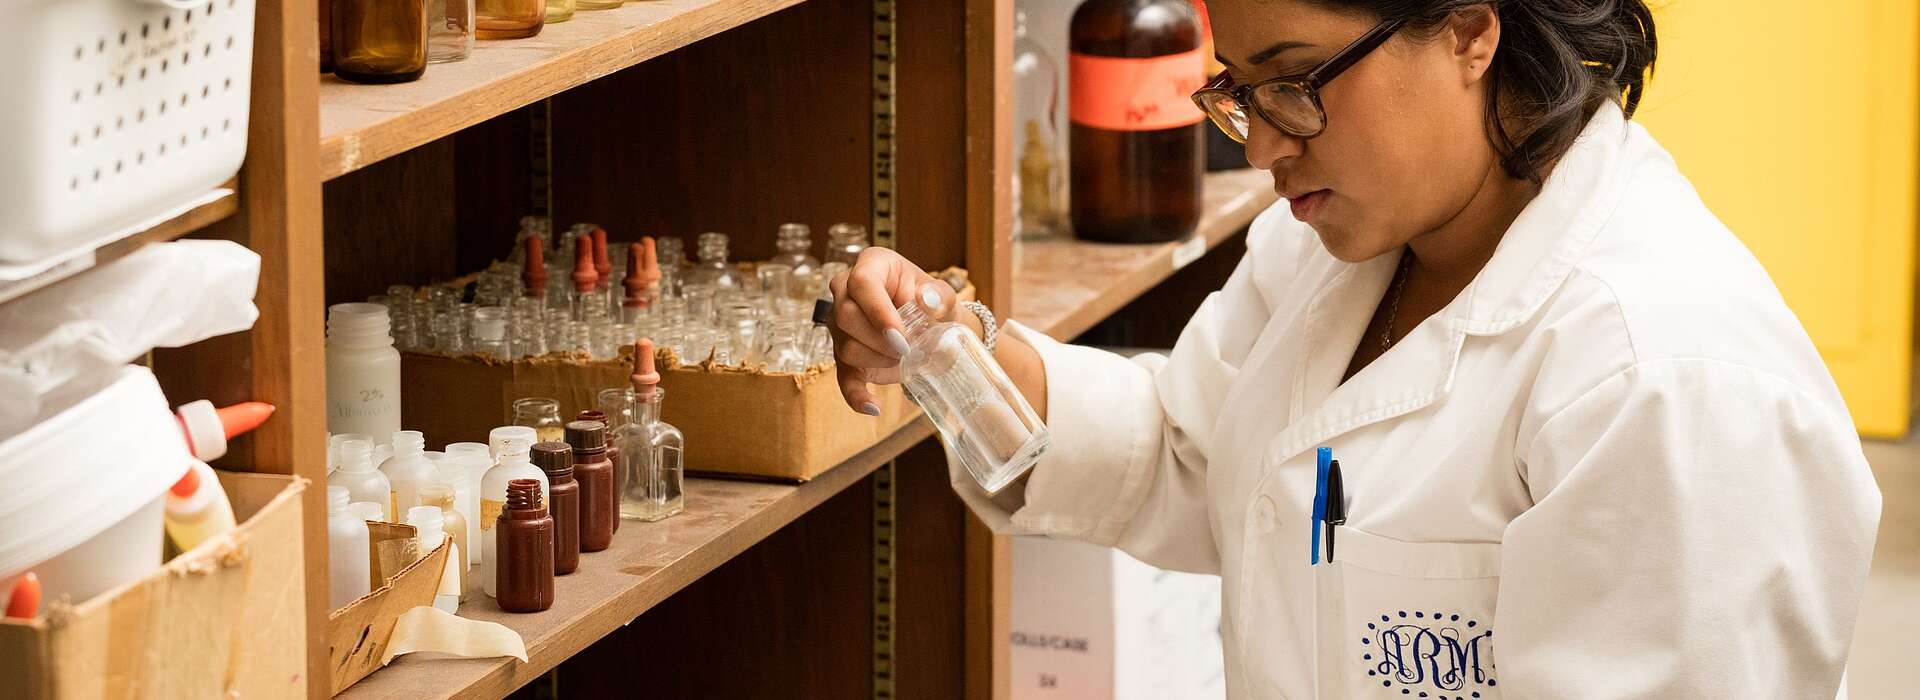 Student in a white lab coat analyzing a glass bottle